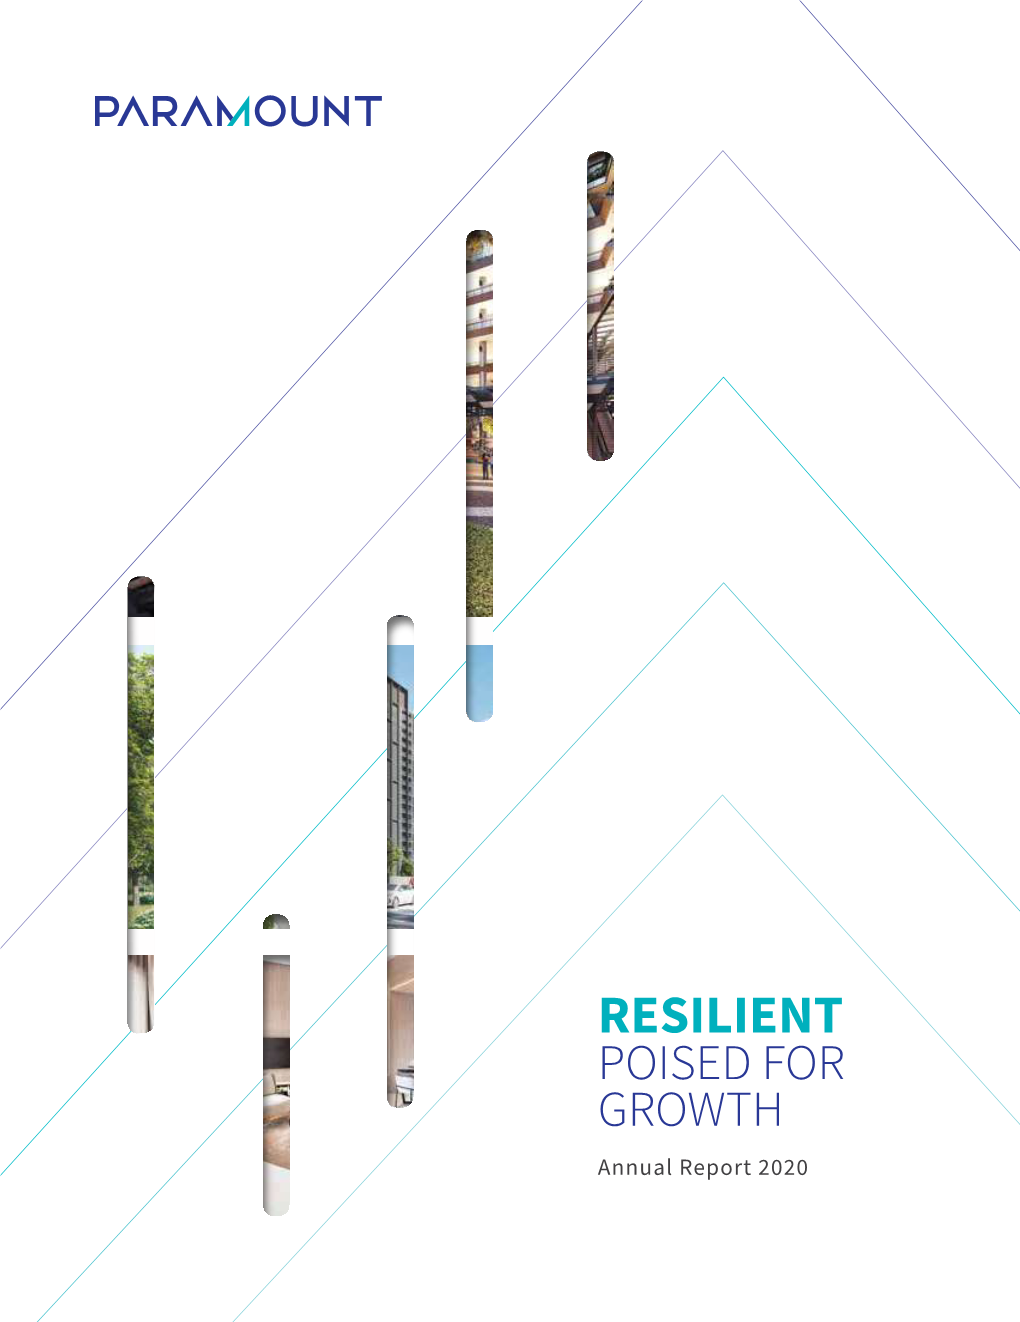 RESILIENT POISED for GROWTH Annual Report 2020 Paramount Values Sustainability As Part of Its Business Philosophy